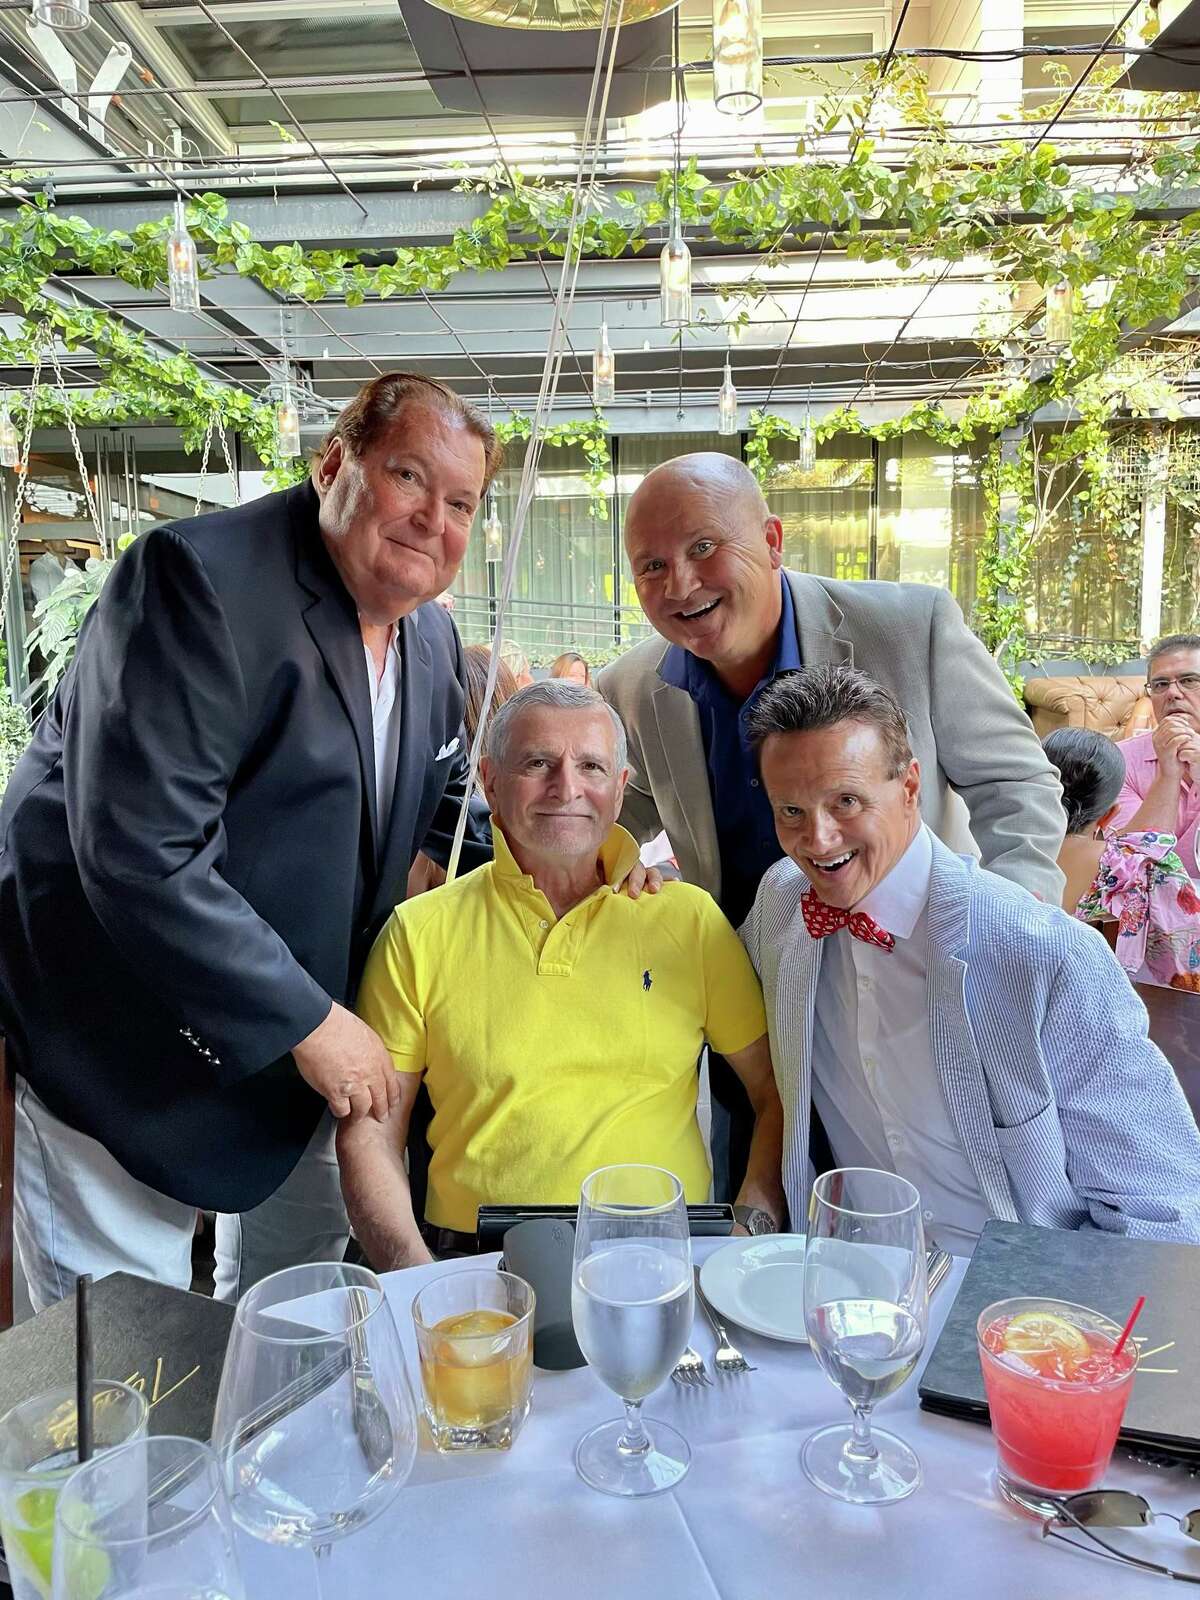 dr.  Leo Donovan of Stamford, center, celebrates his 80th birthday at Tony's at the J House in Riverside on July 30 with his former colleagues, Dr.  Lou Tufano, right, of Hamden and Dr.  Jay Berkowitz, left, of Milford and Tony Capasso, back right.